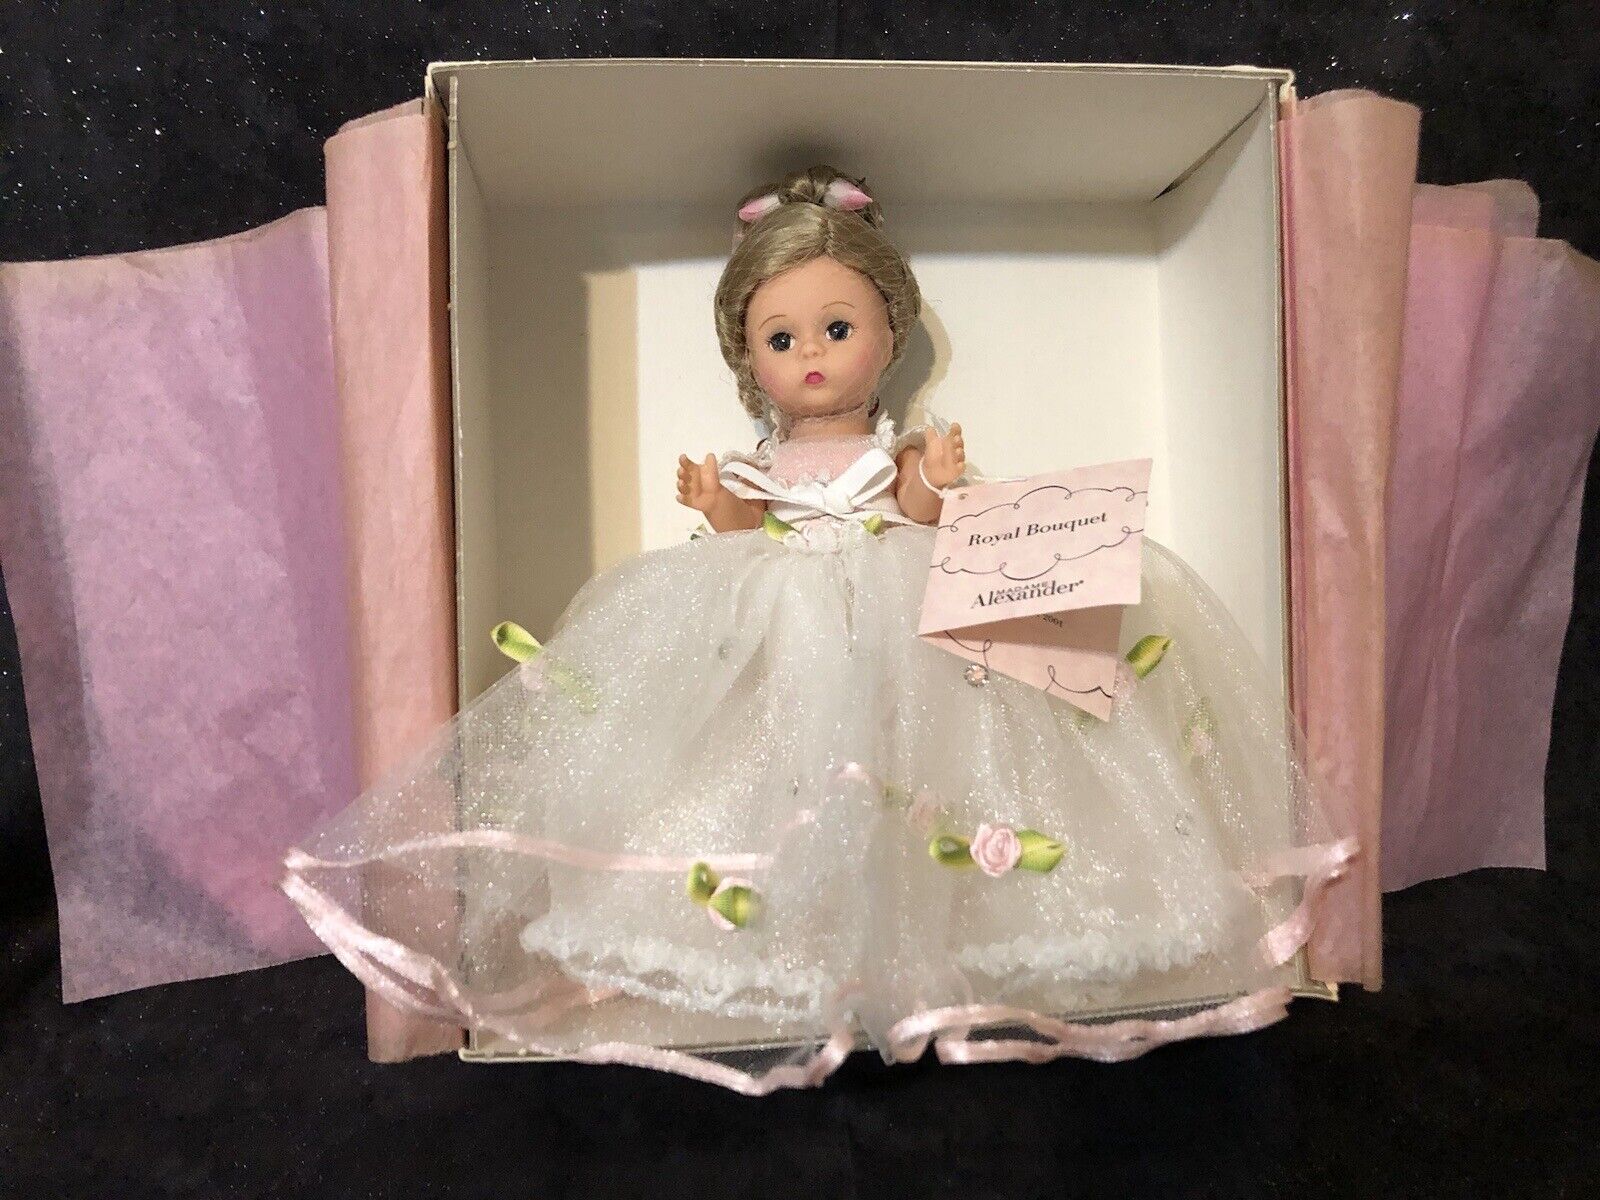 NEW Madame Alexander 8” Doll “Royal Bouquet” 2001 Style #28895 Limited Edition